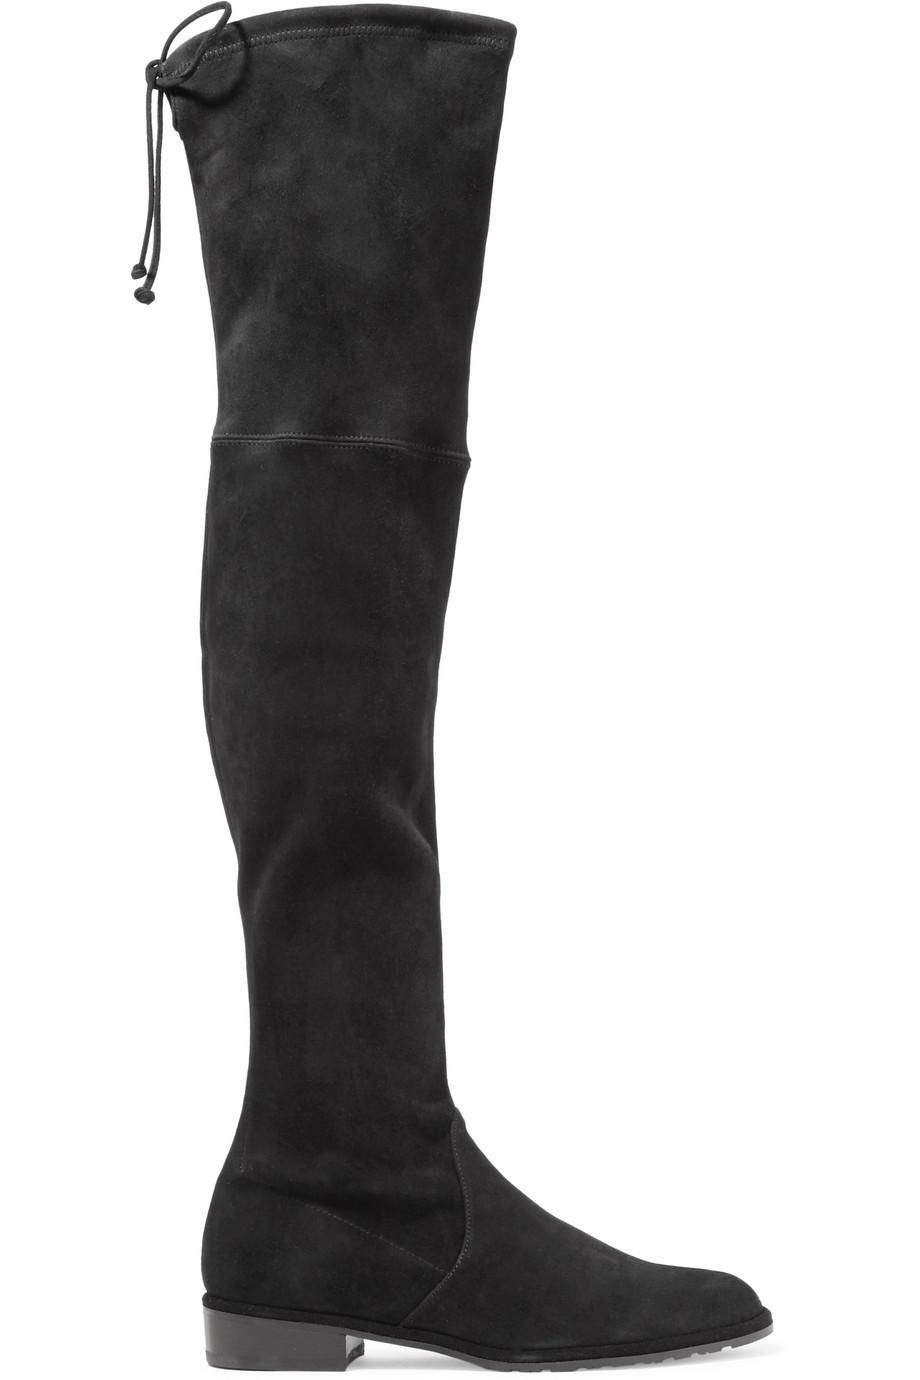 The Dos and Don'ts of Wearing Over-the-Knee Boots | Who What Wear